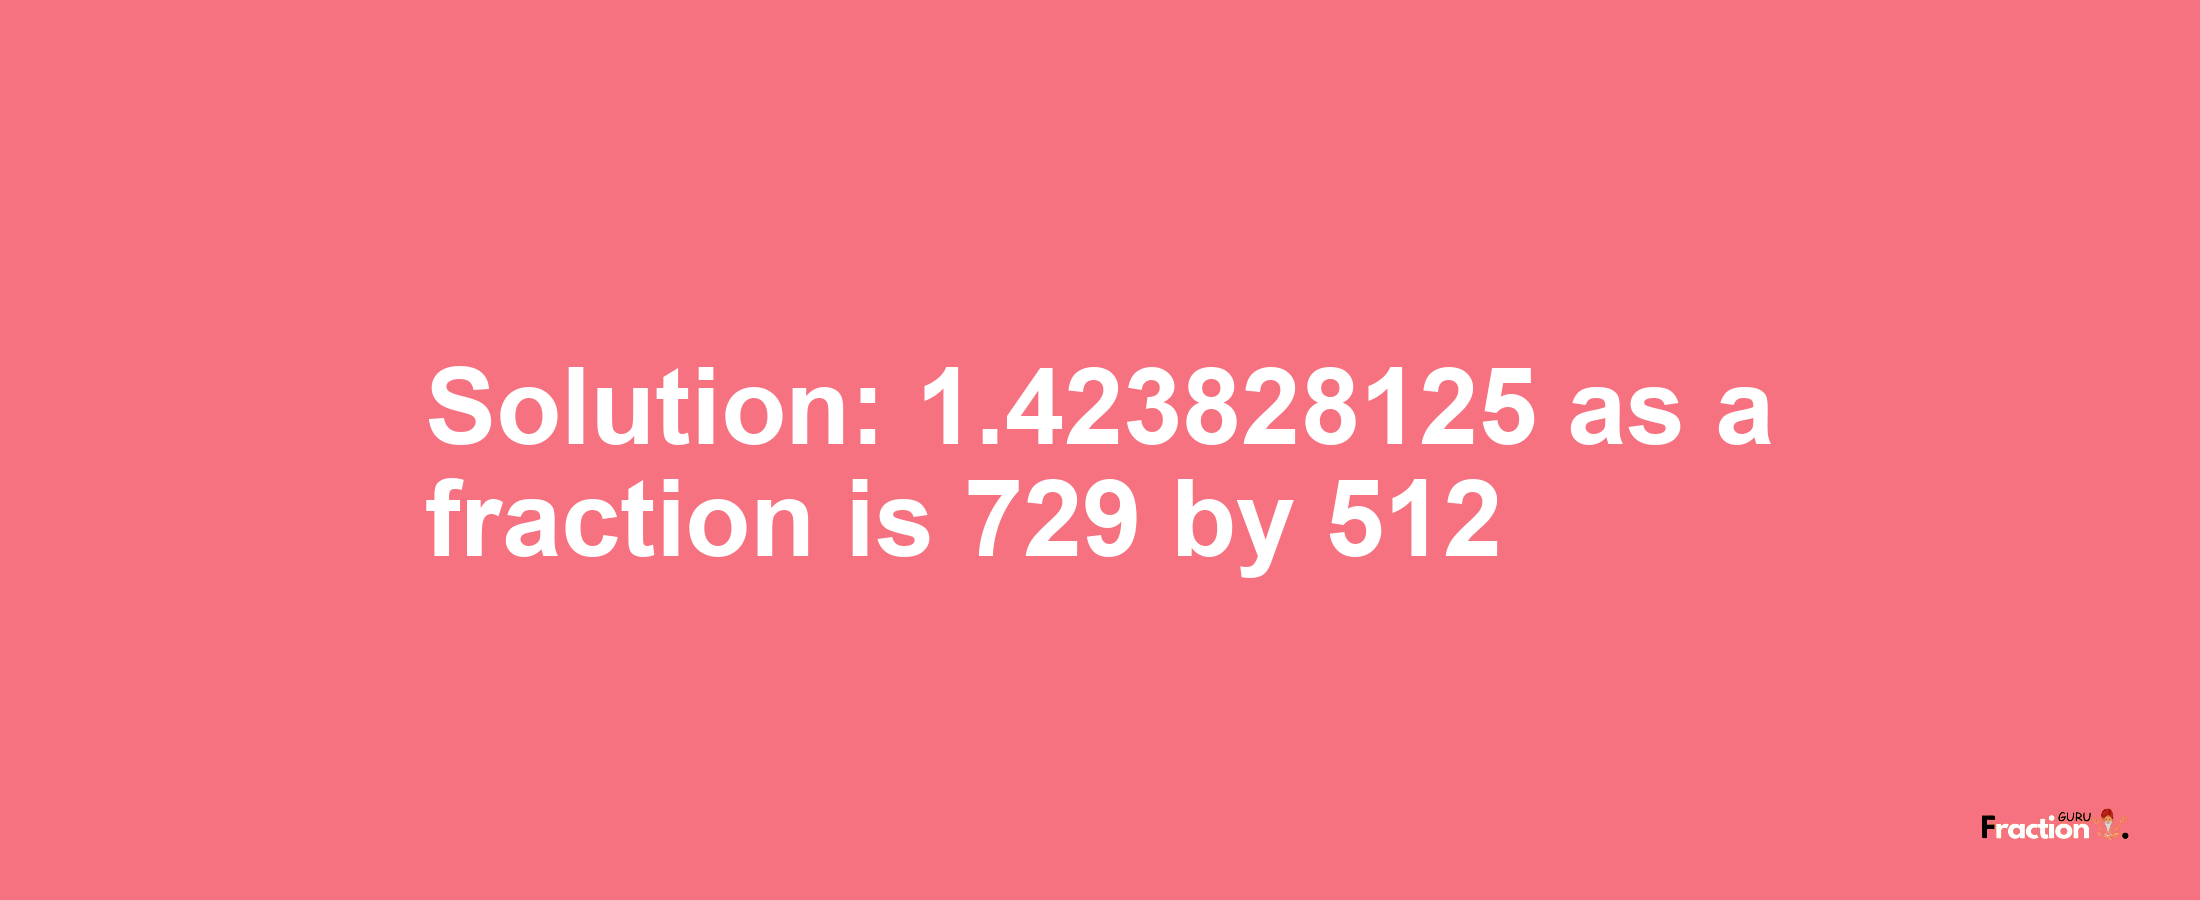 Solution:1.423828125 as a fraction is 729/512